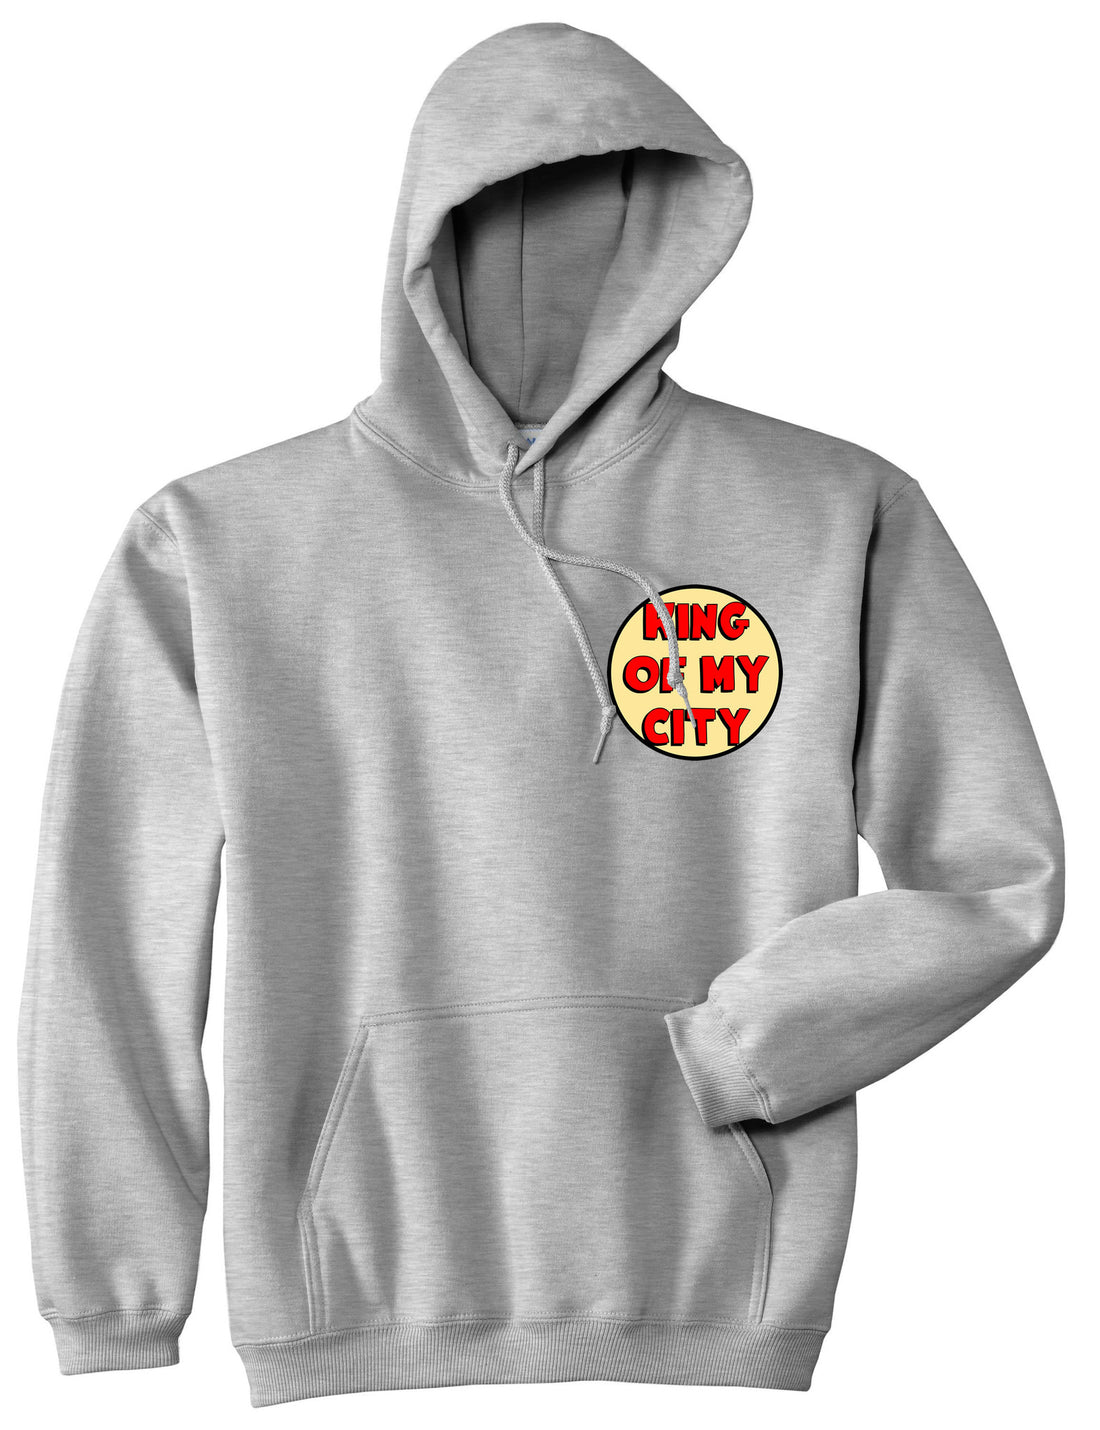 King Of My City Chest Logo Pullover Hoodie Hoody in Grey by Kings Of NY